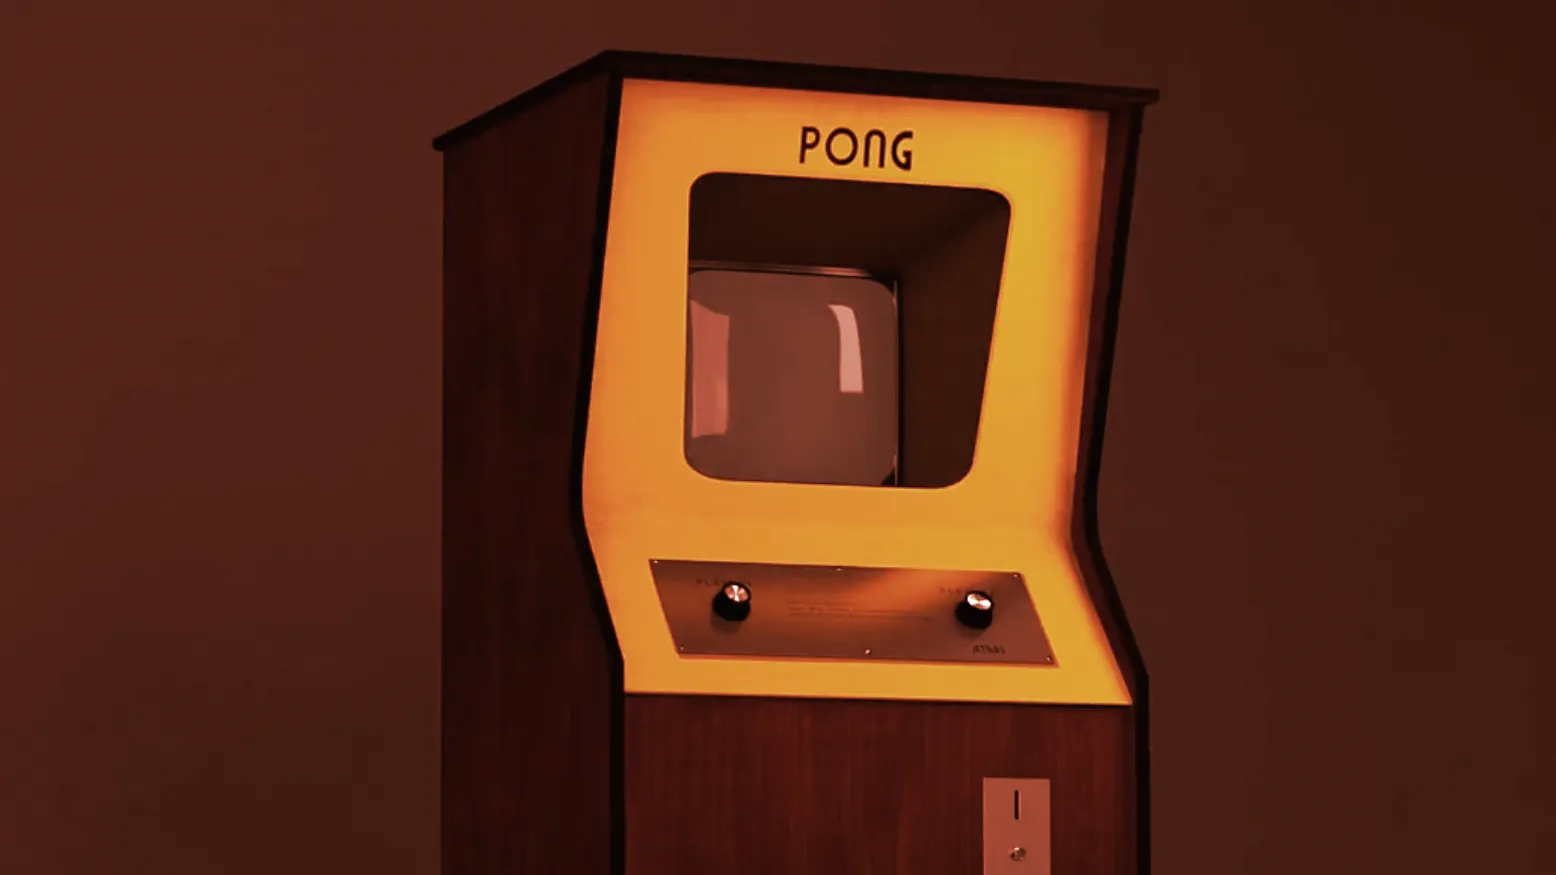 Atari's pong is getting the NFT treatment. Image: MakersPlace